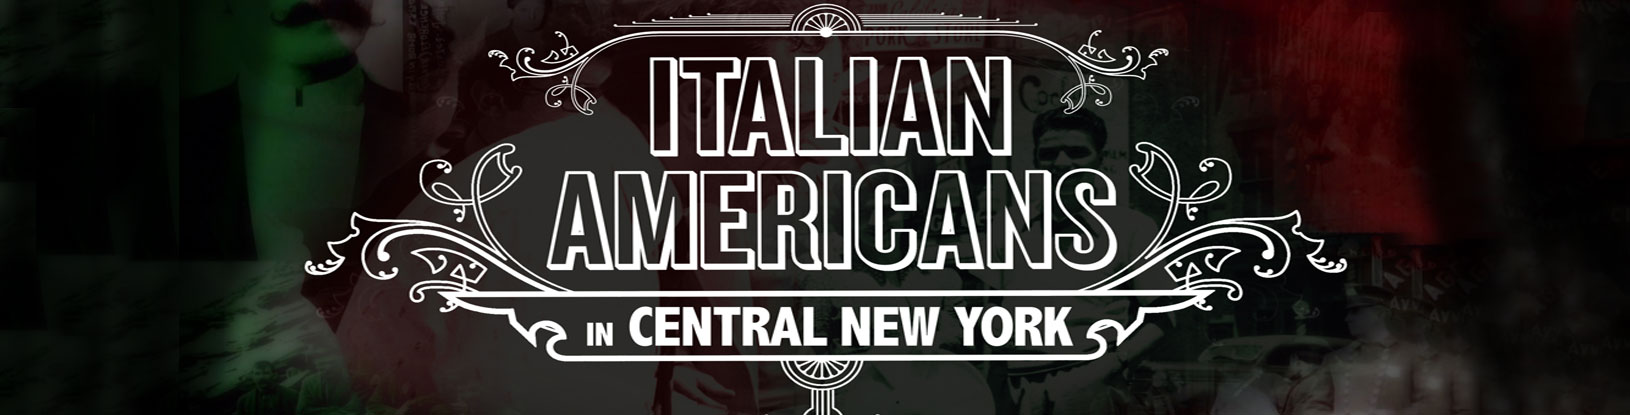 Italian Americans in Central New York